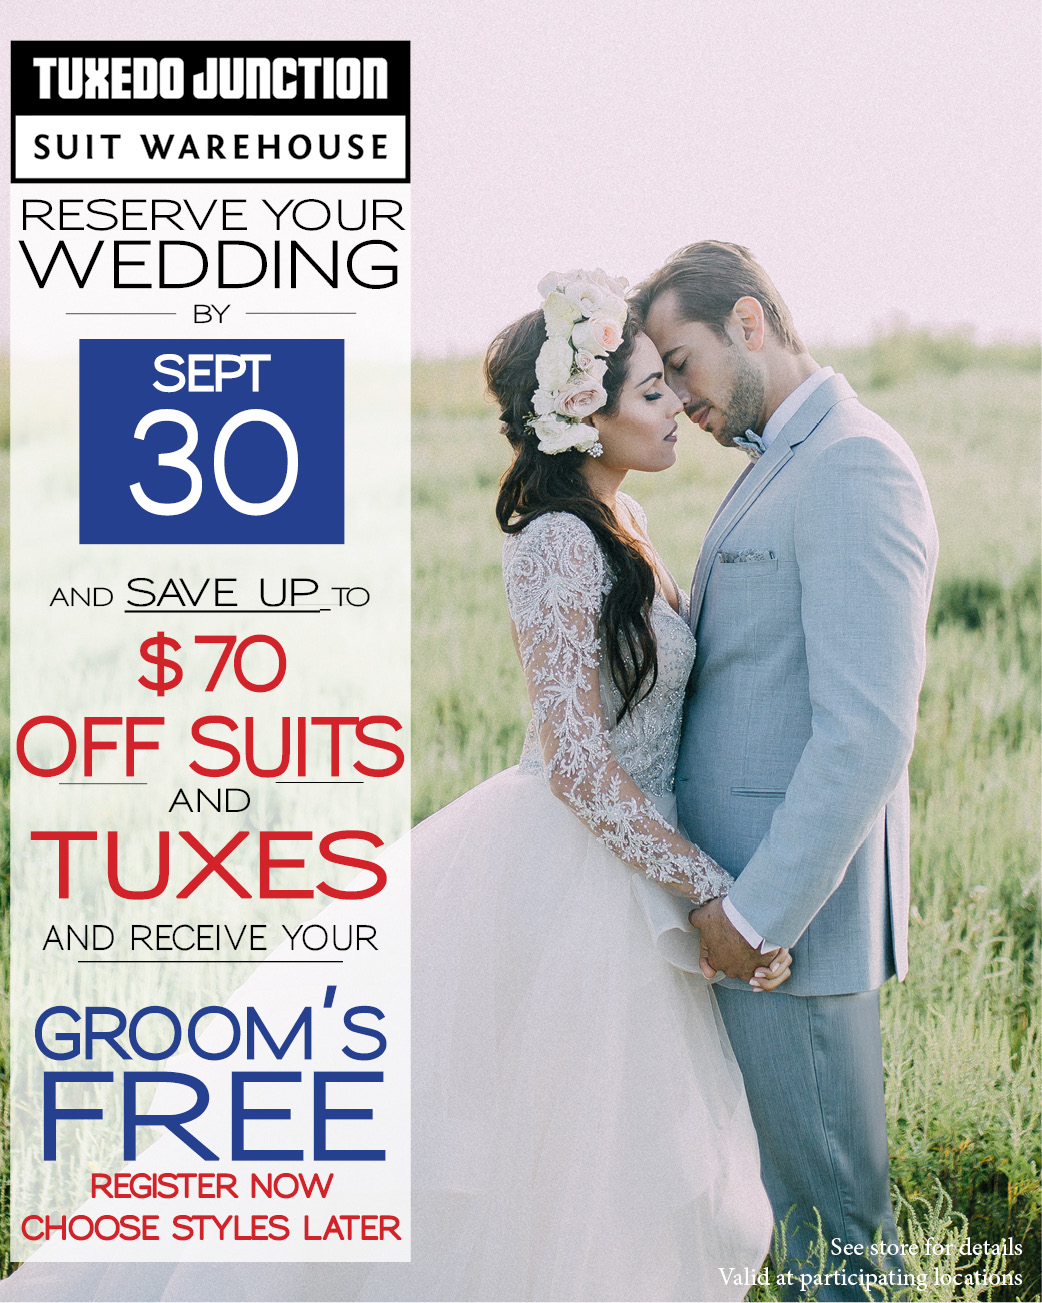 Reserve your wedding by July and get $70 off suits and tuxes